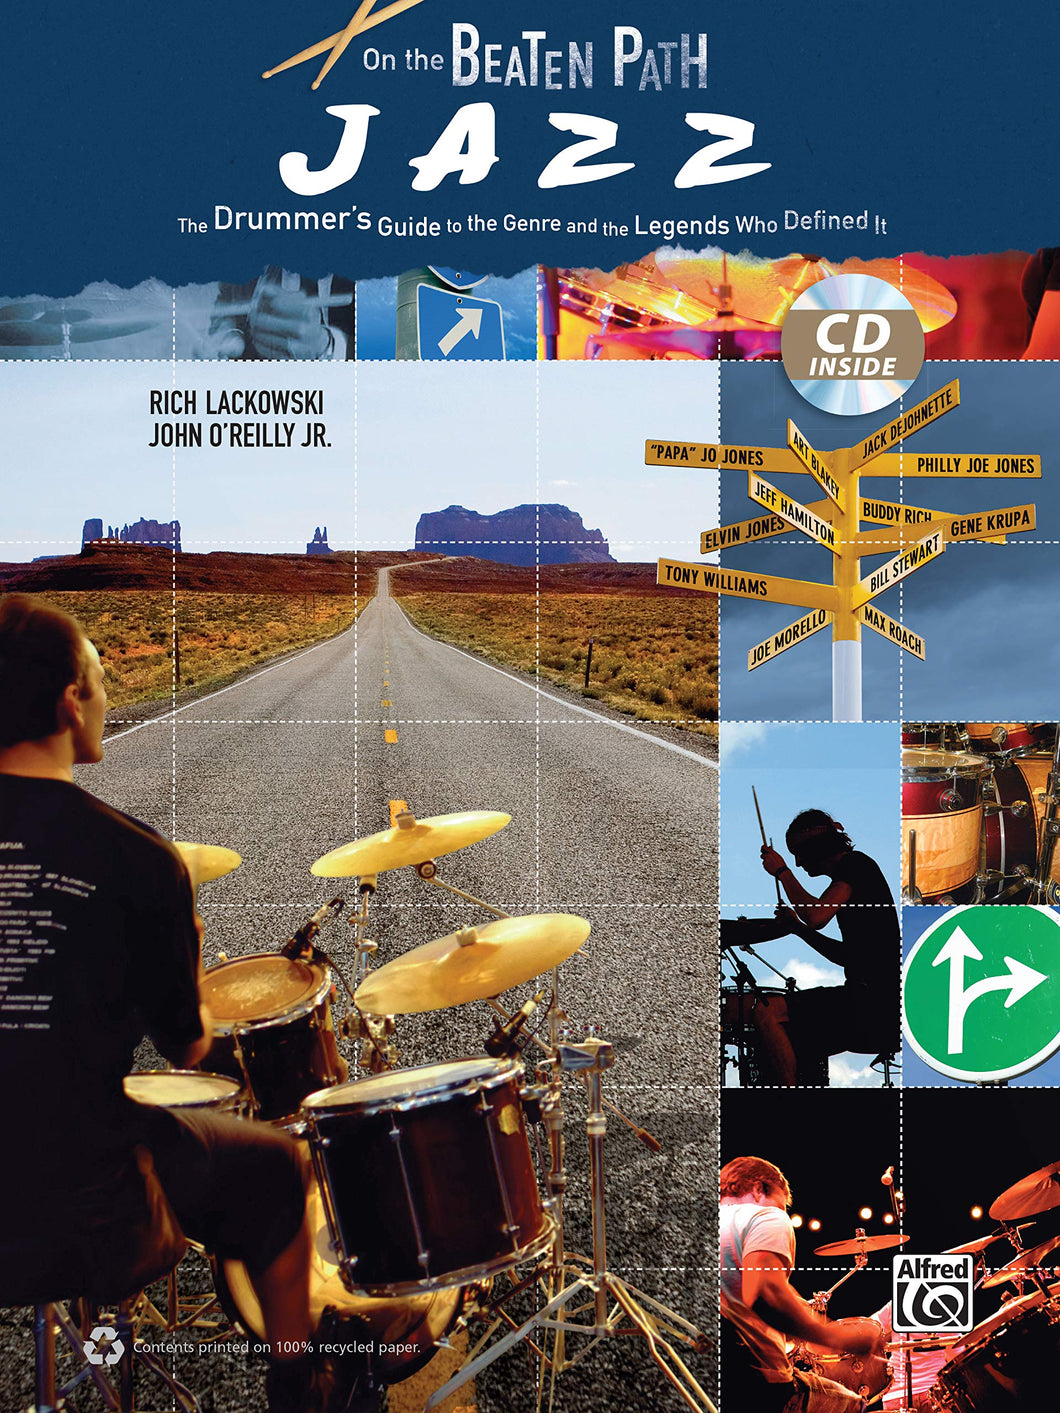 A Lot of Livin' to Do - Pat Metheny - Collection of Drum Transcriptions / Drum Sheet Music - Alfred Music OBPJDGLDI